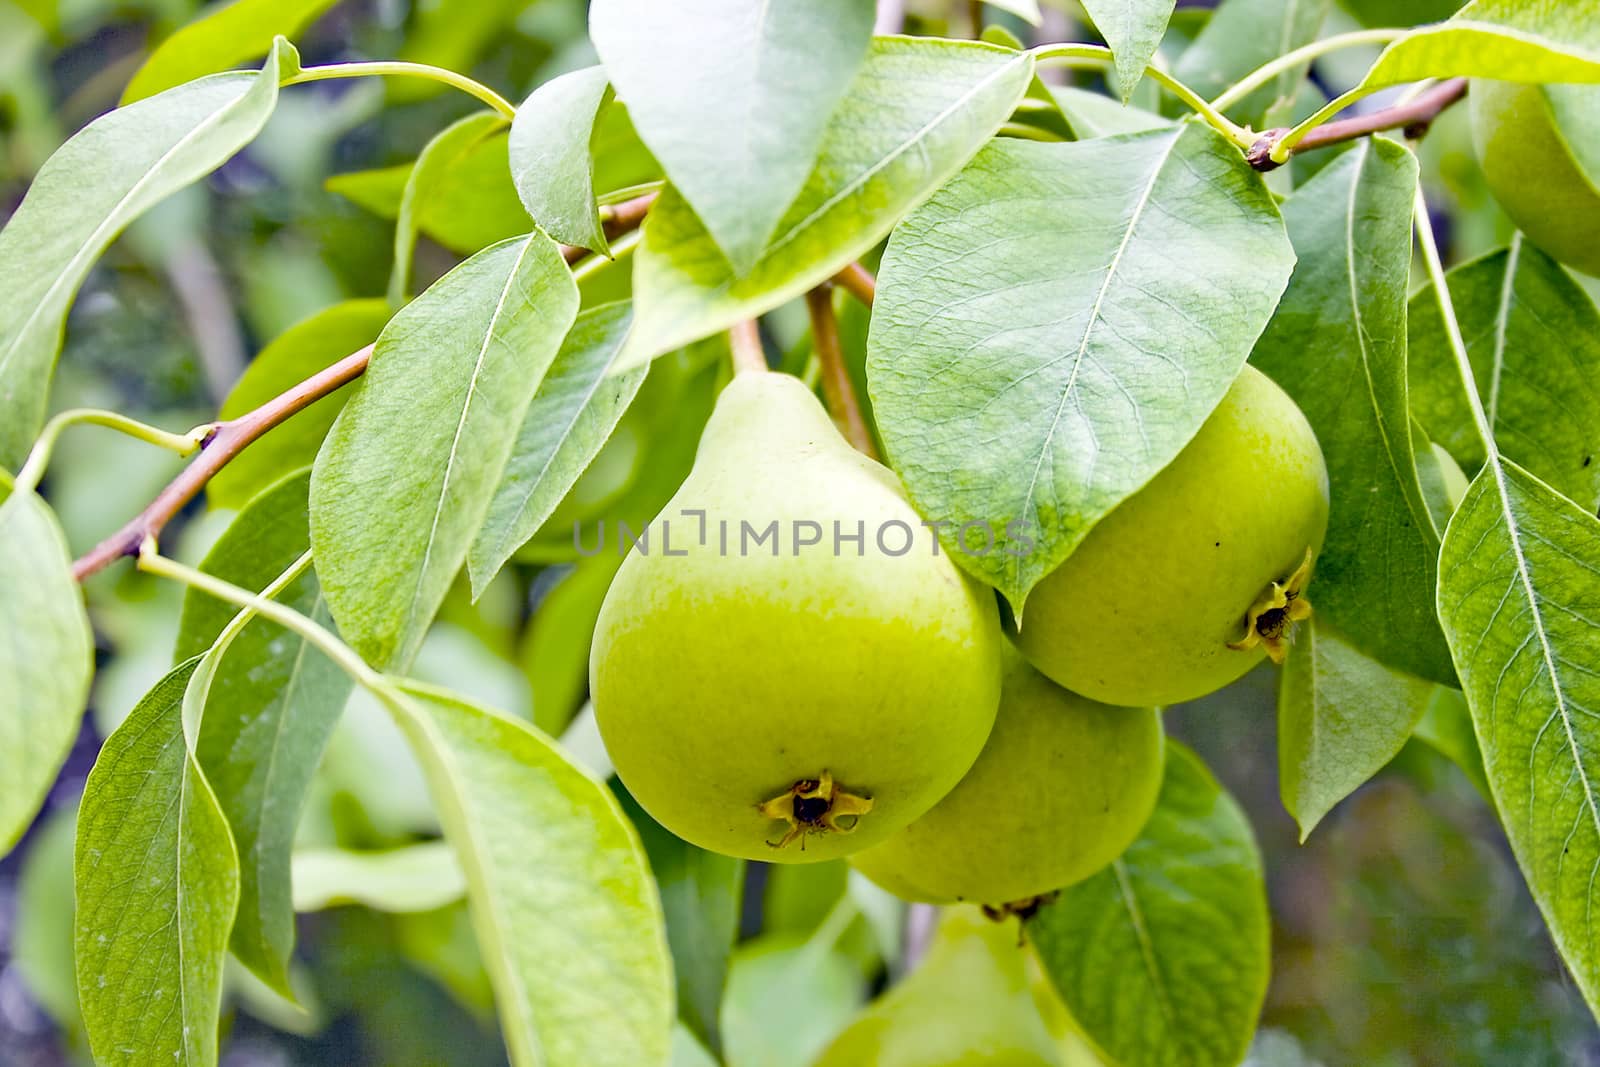 green pears on the tree in the garden by mimirus